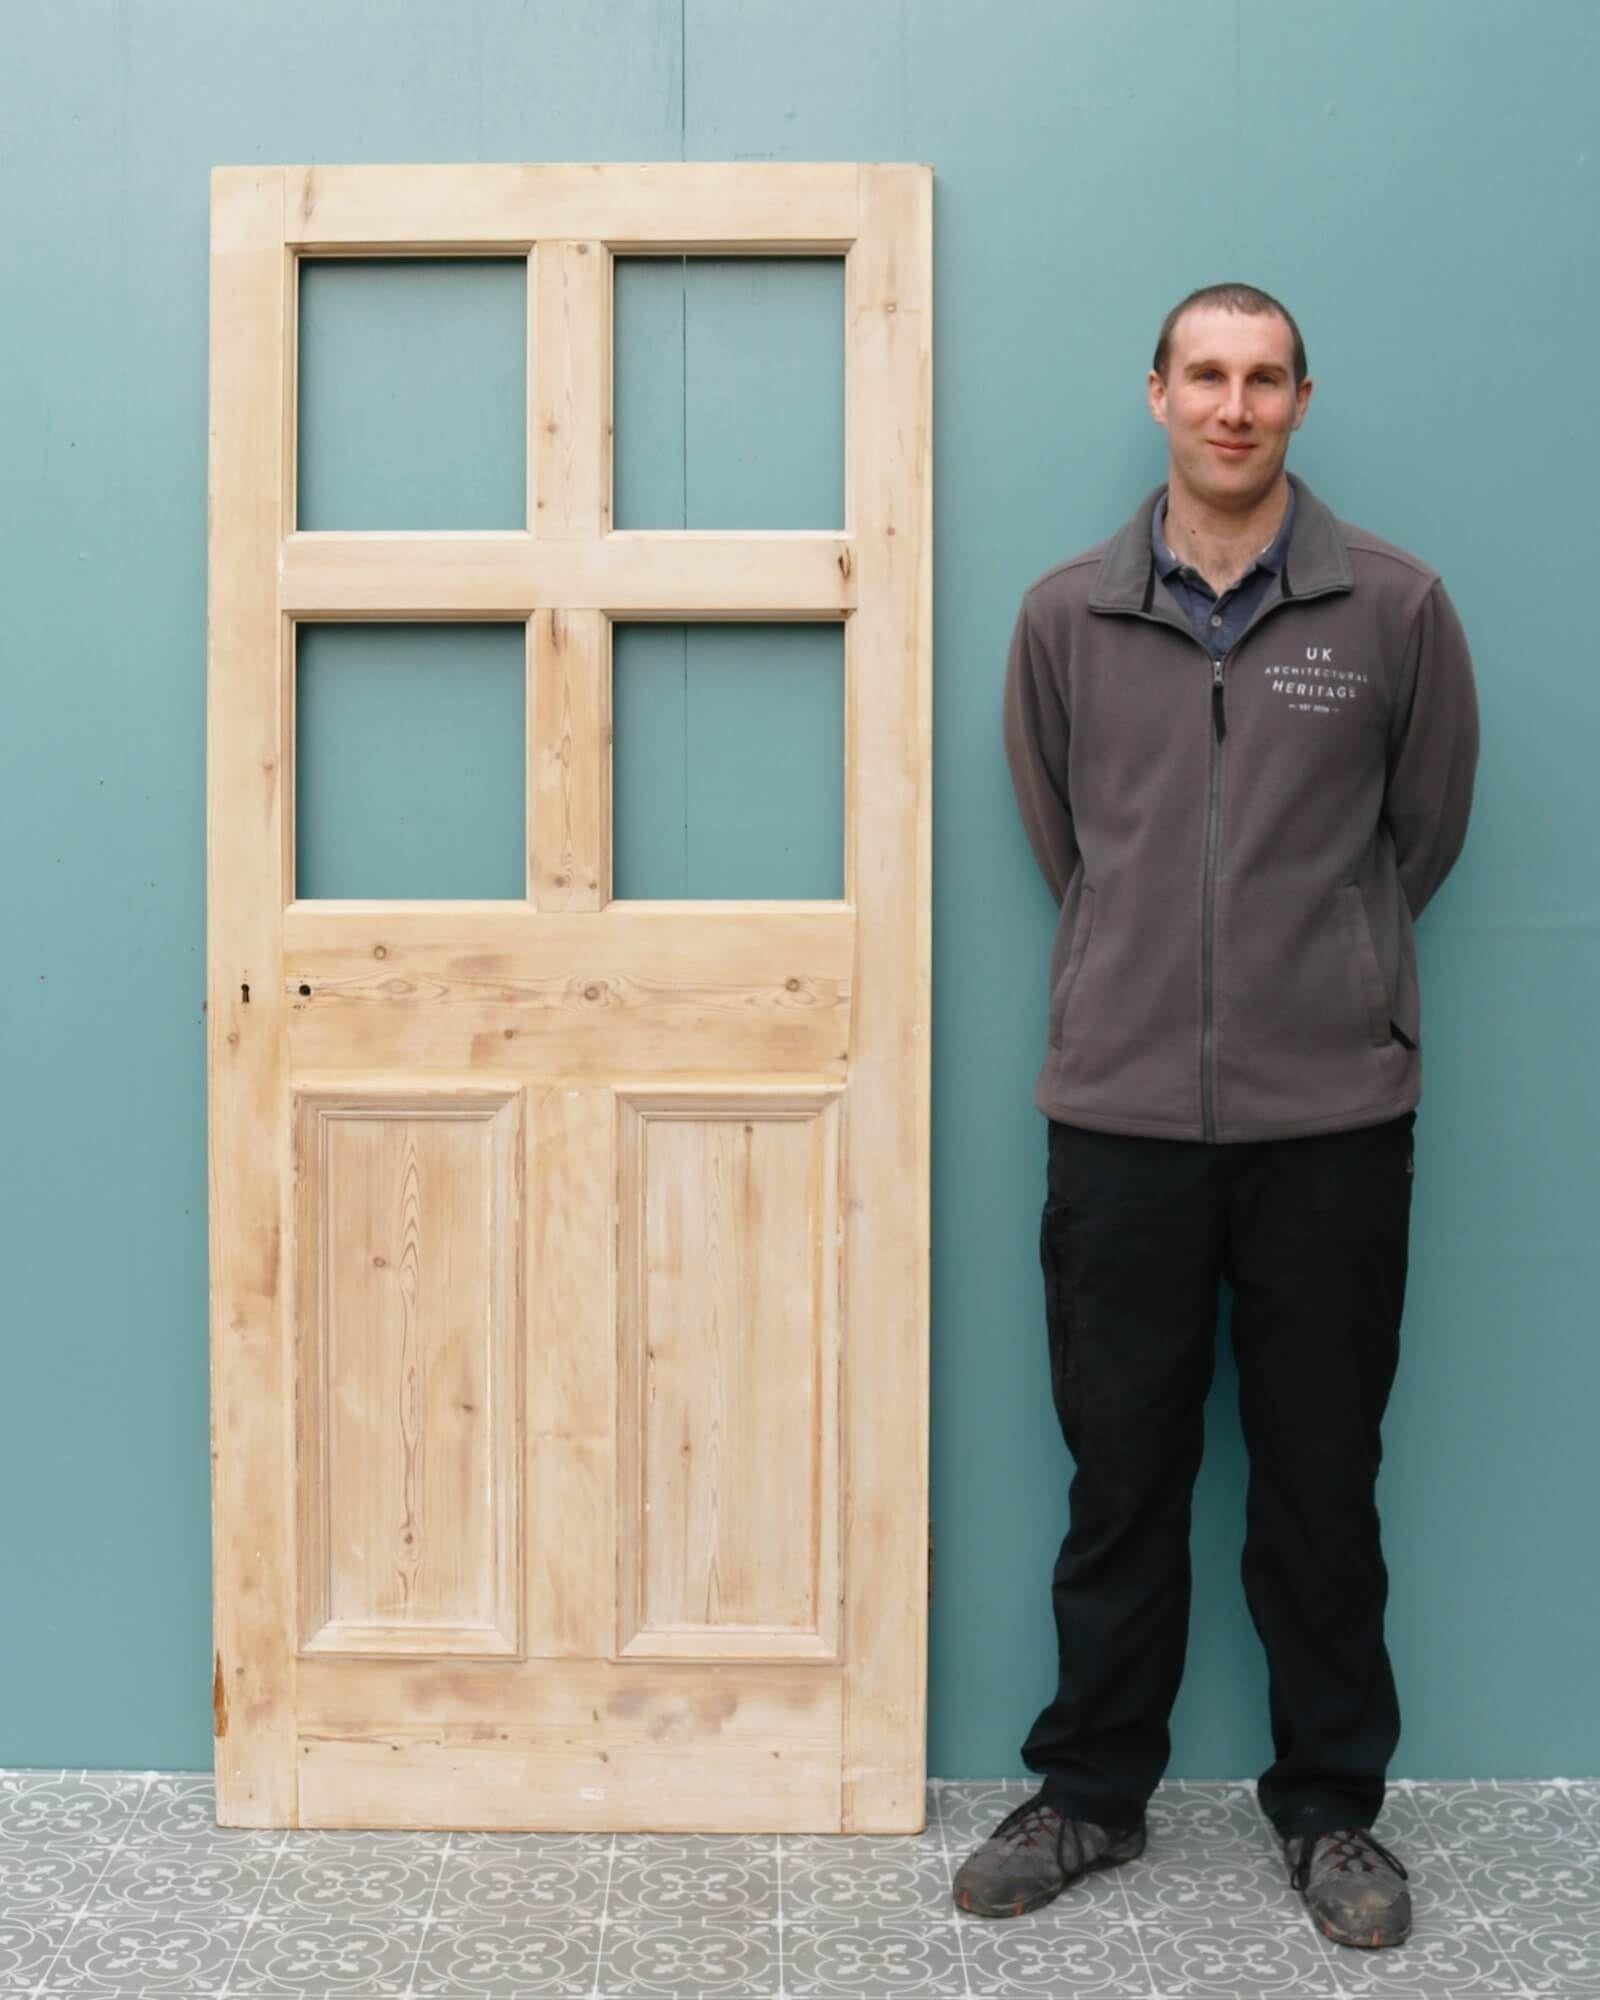 This unglazed pine door circa 1900 makes a beautiful reclaimed Victorian front door for a period townhouse. Alternatively, it could be used as an internal door for a kitchen or hallway. It features four unglazed panels to the top, allowing for